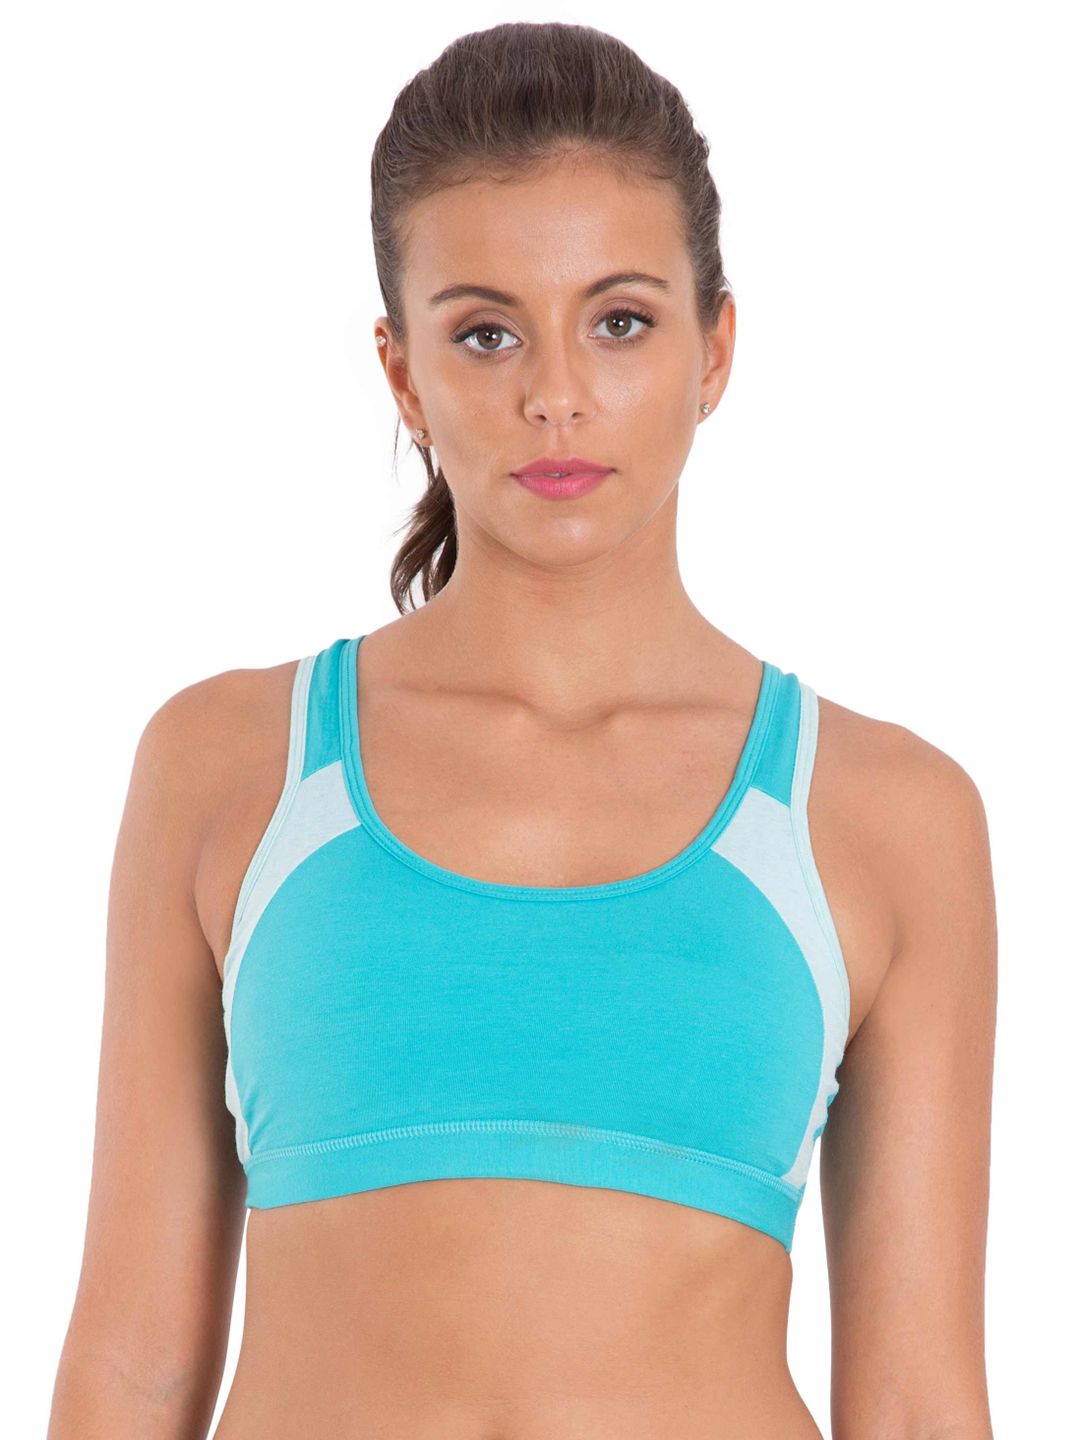 Jockey Blue Solid Non-Wired Lightly Padded Sports Bra 1380-0105 Price in India